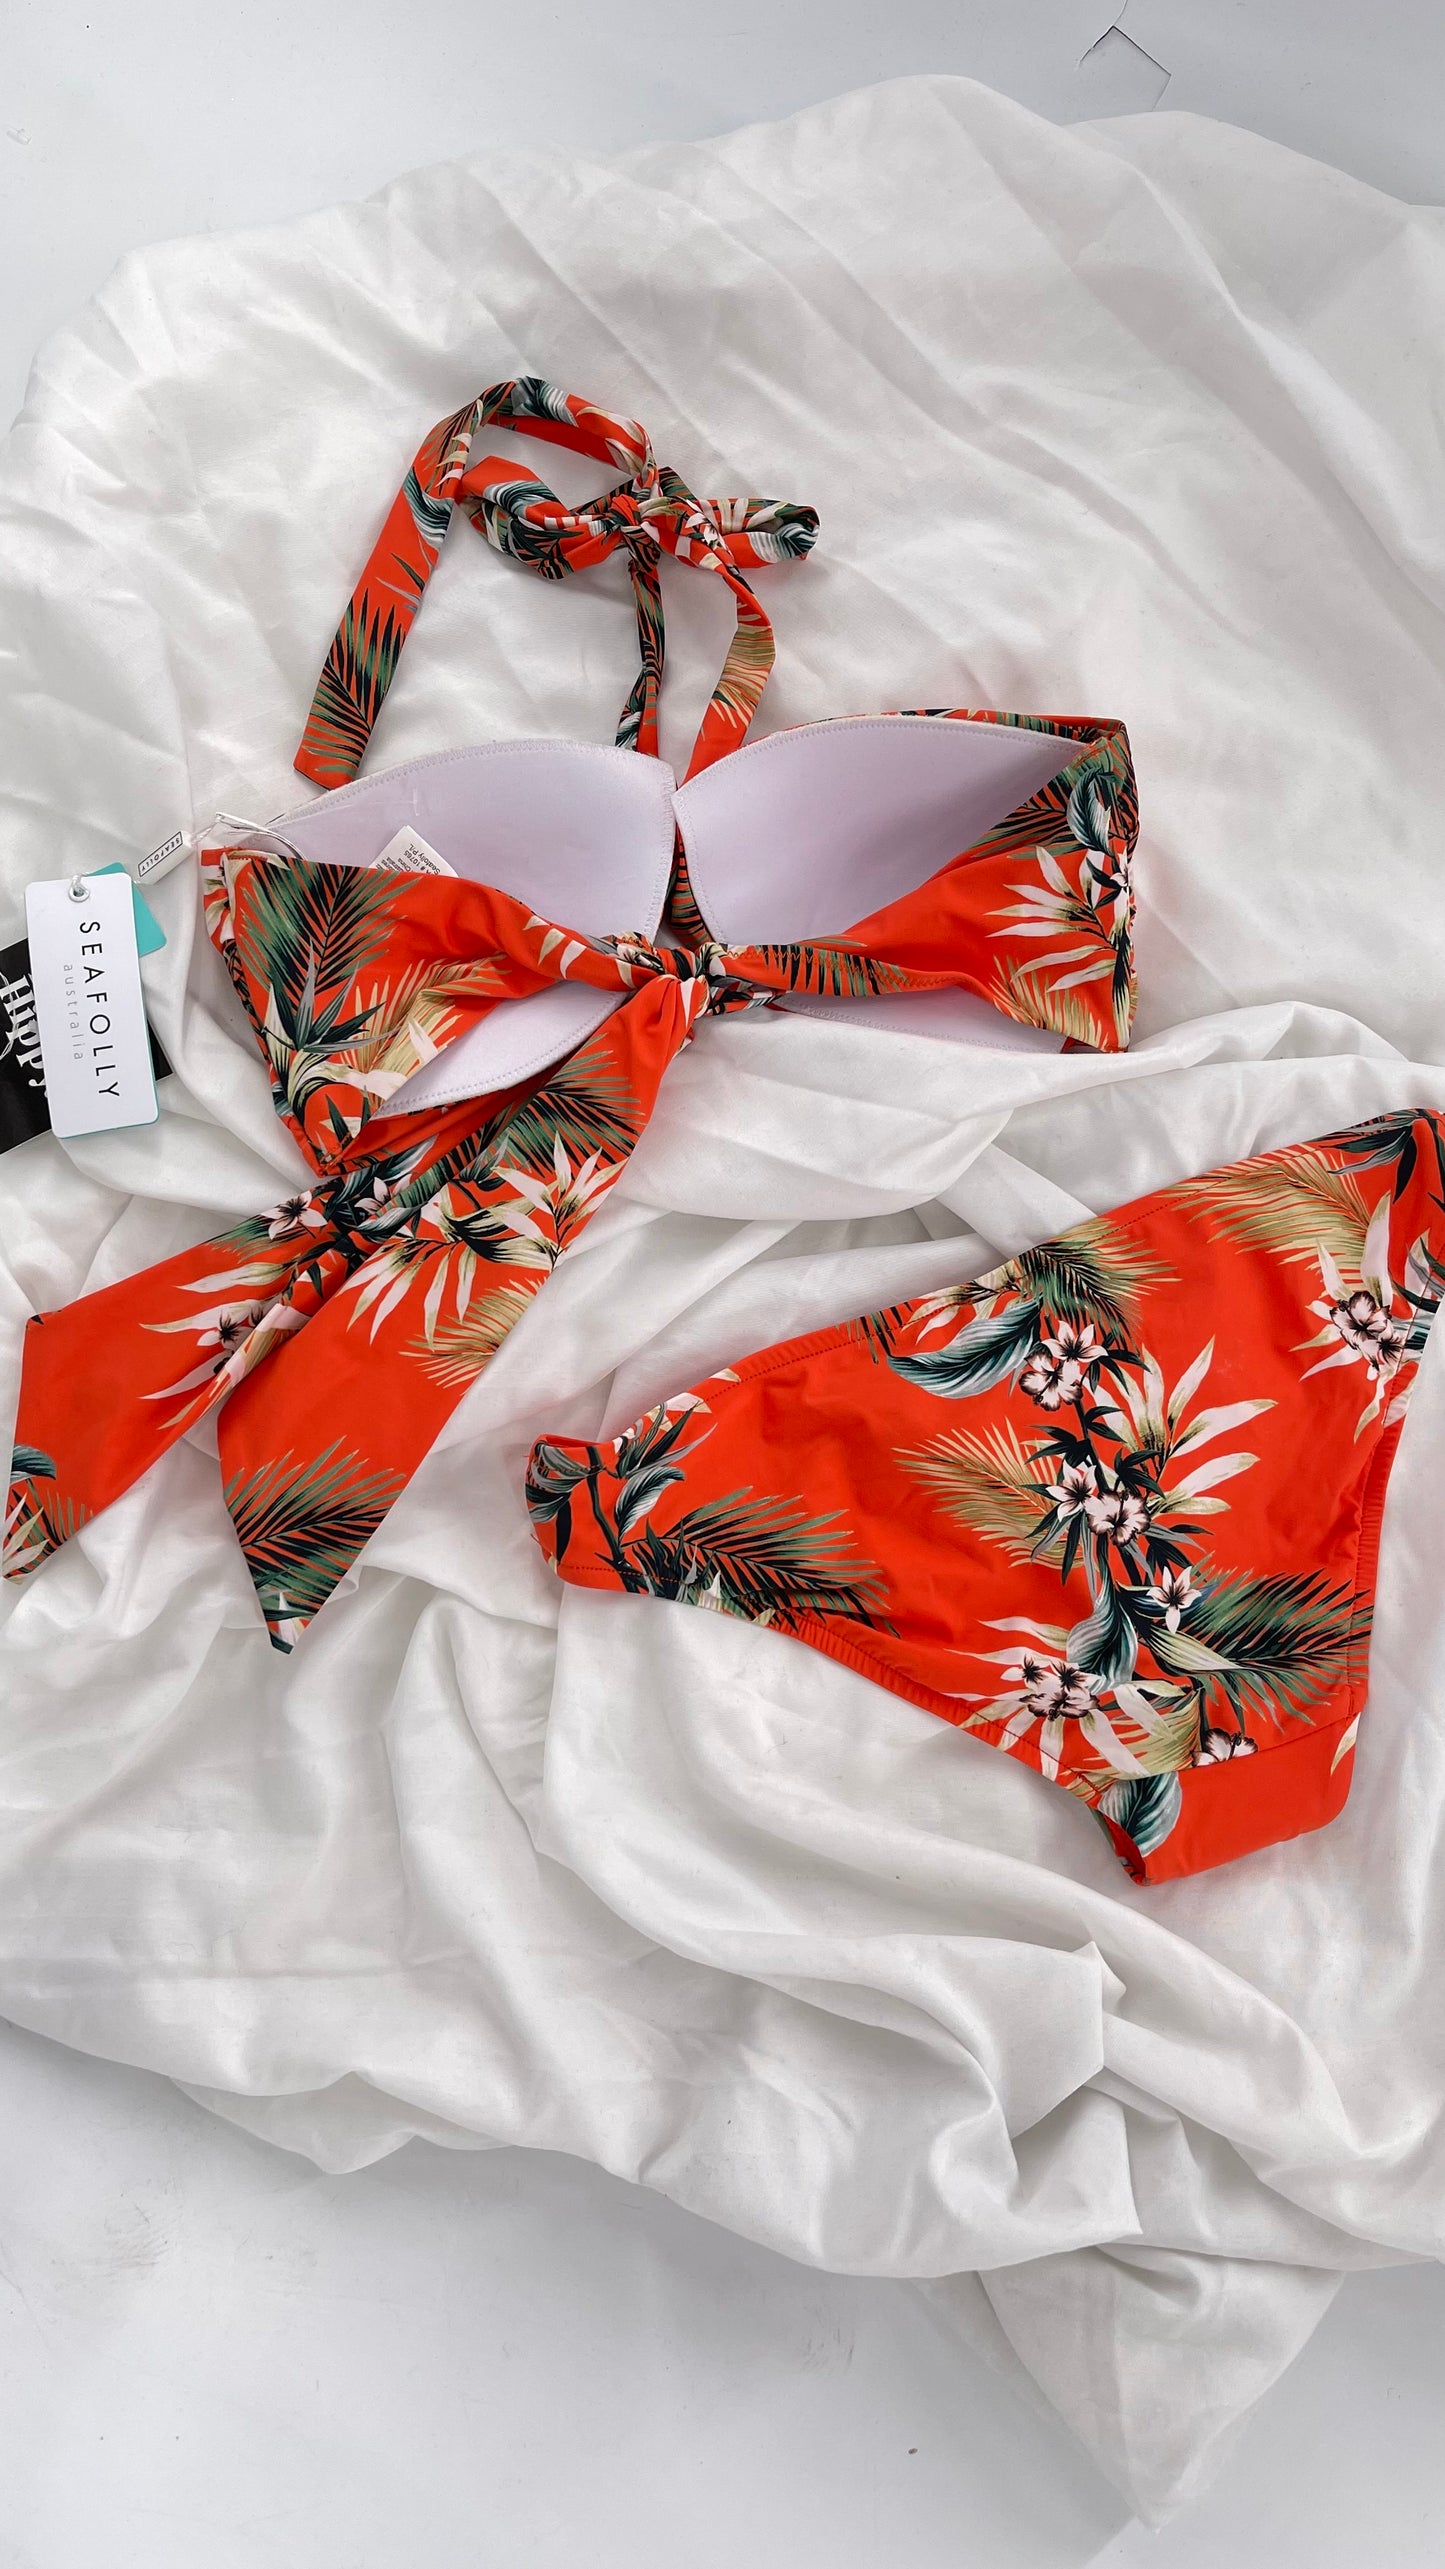 Anthropologie Sea Folly Orange Tropical Swim Set with Tags Attached (10 Top 12 Bottoms)